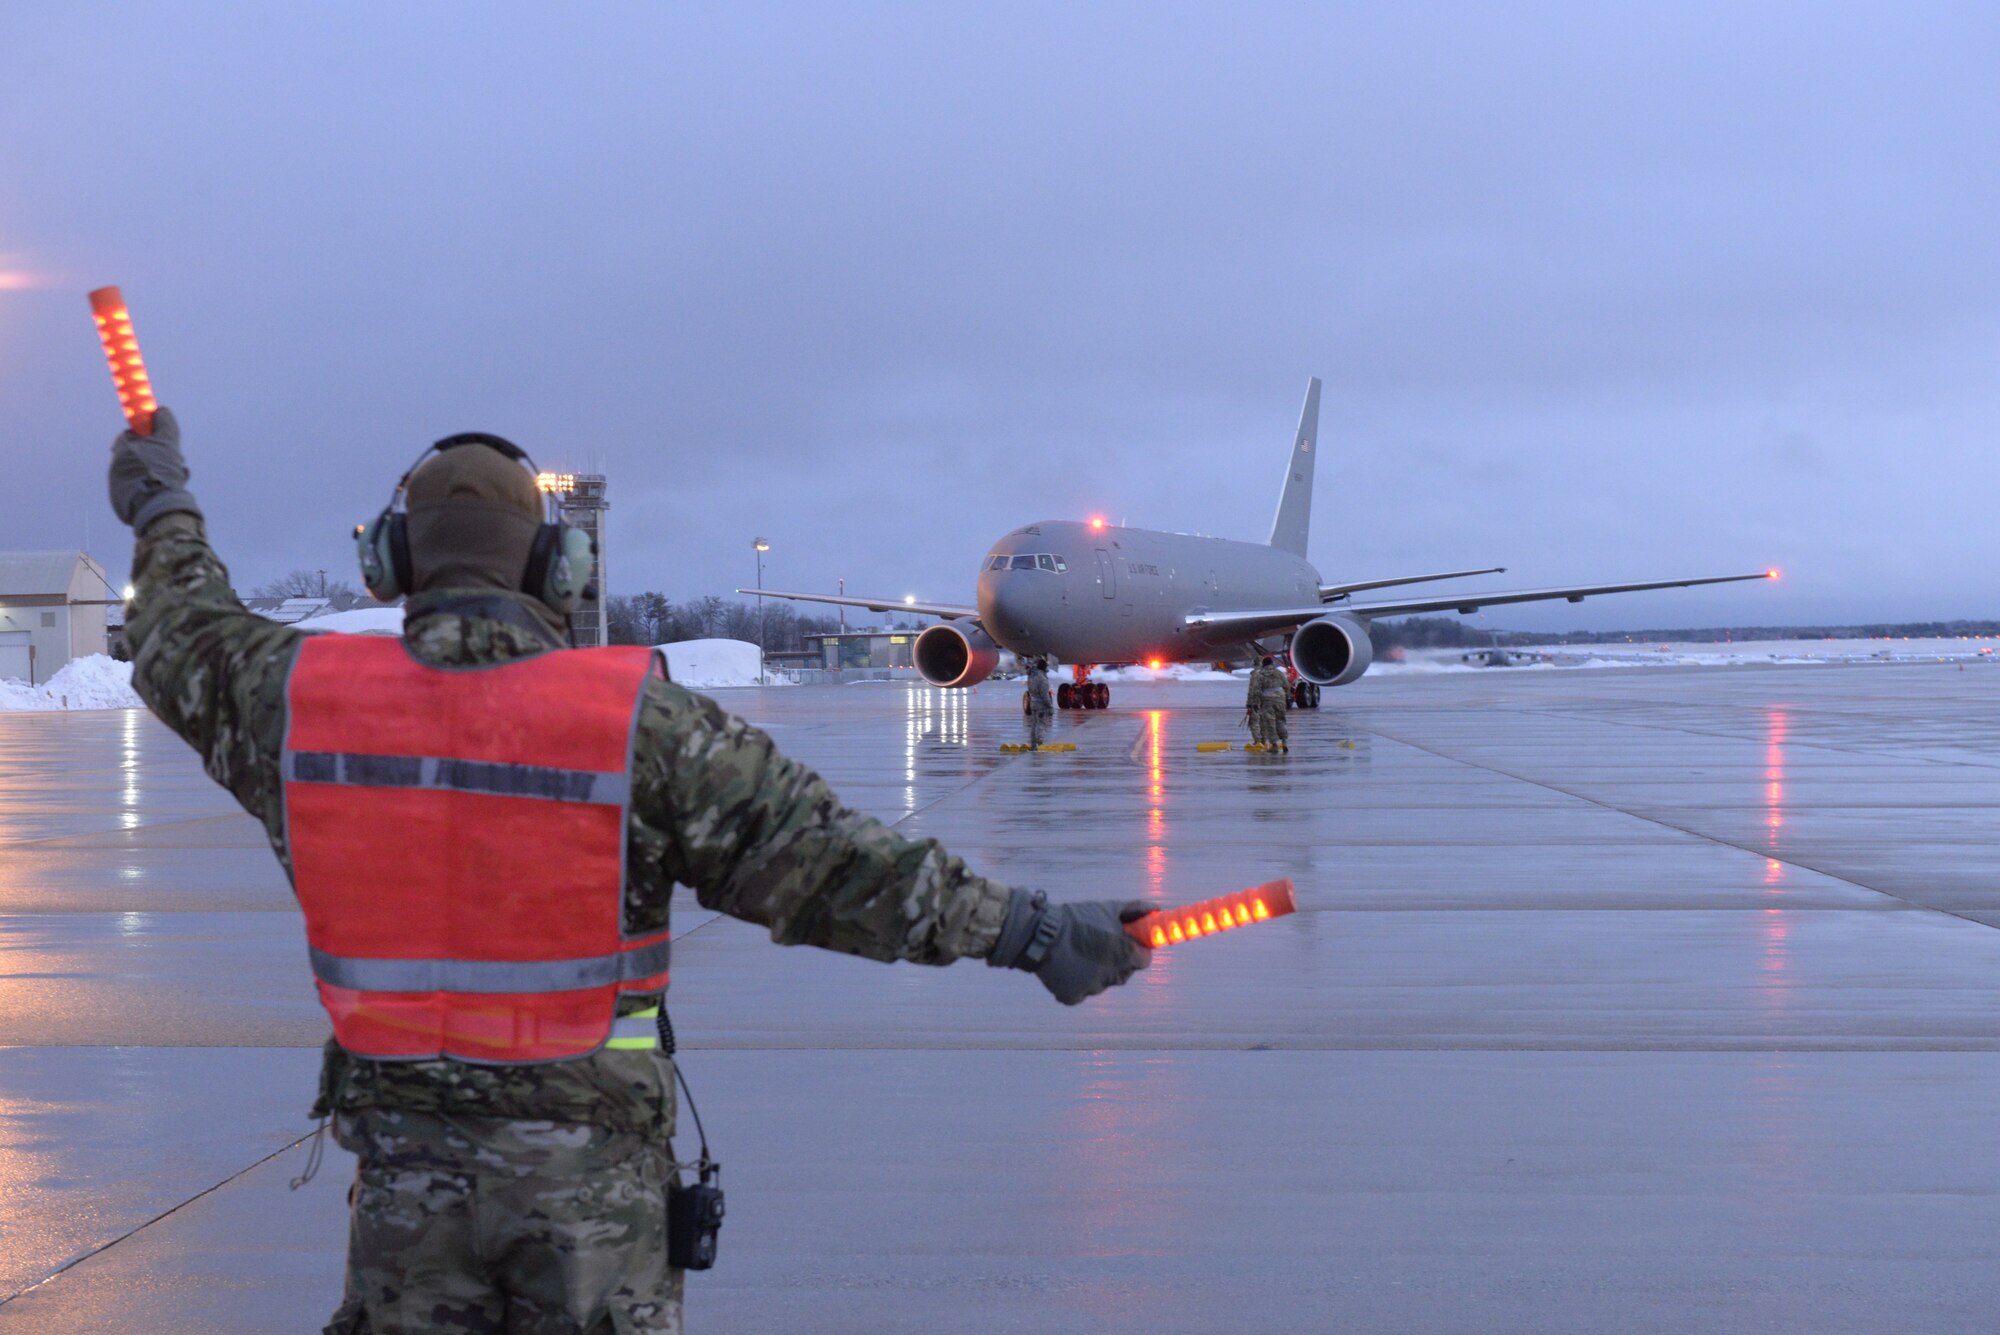 New Hampshire Air National Guard Staff Sgt. Joseph Chase, a flightline crew chief with the 157th Maintenance Squadron, marshals the Wing's fifth and newest KC-46A Pegasus air refueling tanker upon its arrival from Boeing, Feb. 7, 2020. Pease is slated to receive another seven aircraft in 2020. (U.S. Air National Guard photo by Tech. Sgt. Aaron Vezeau)